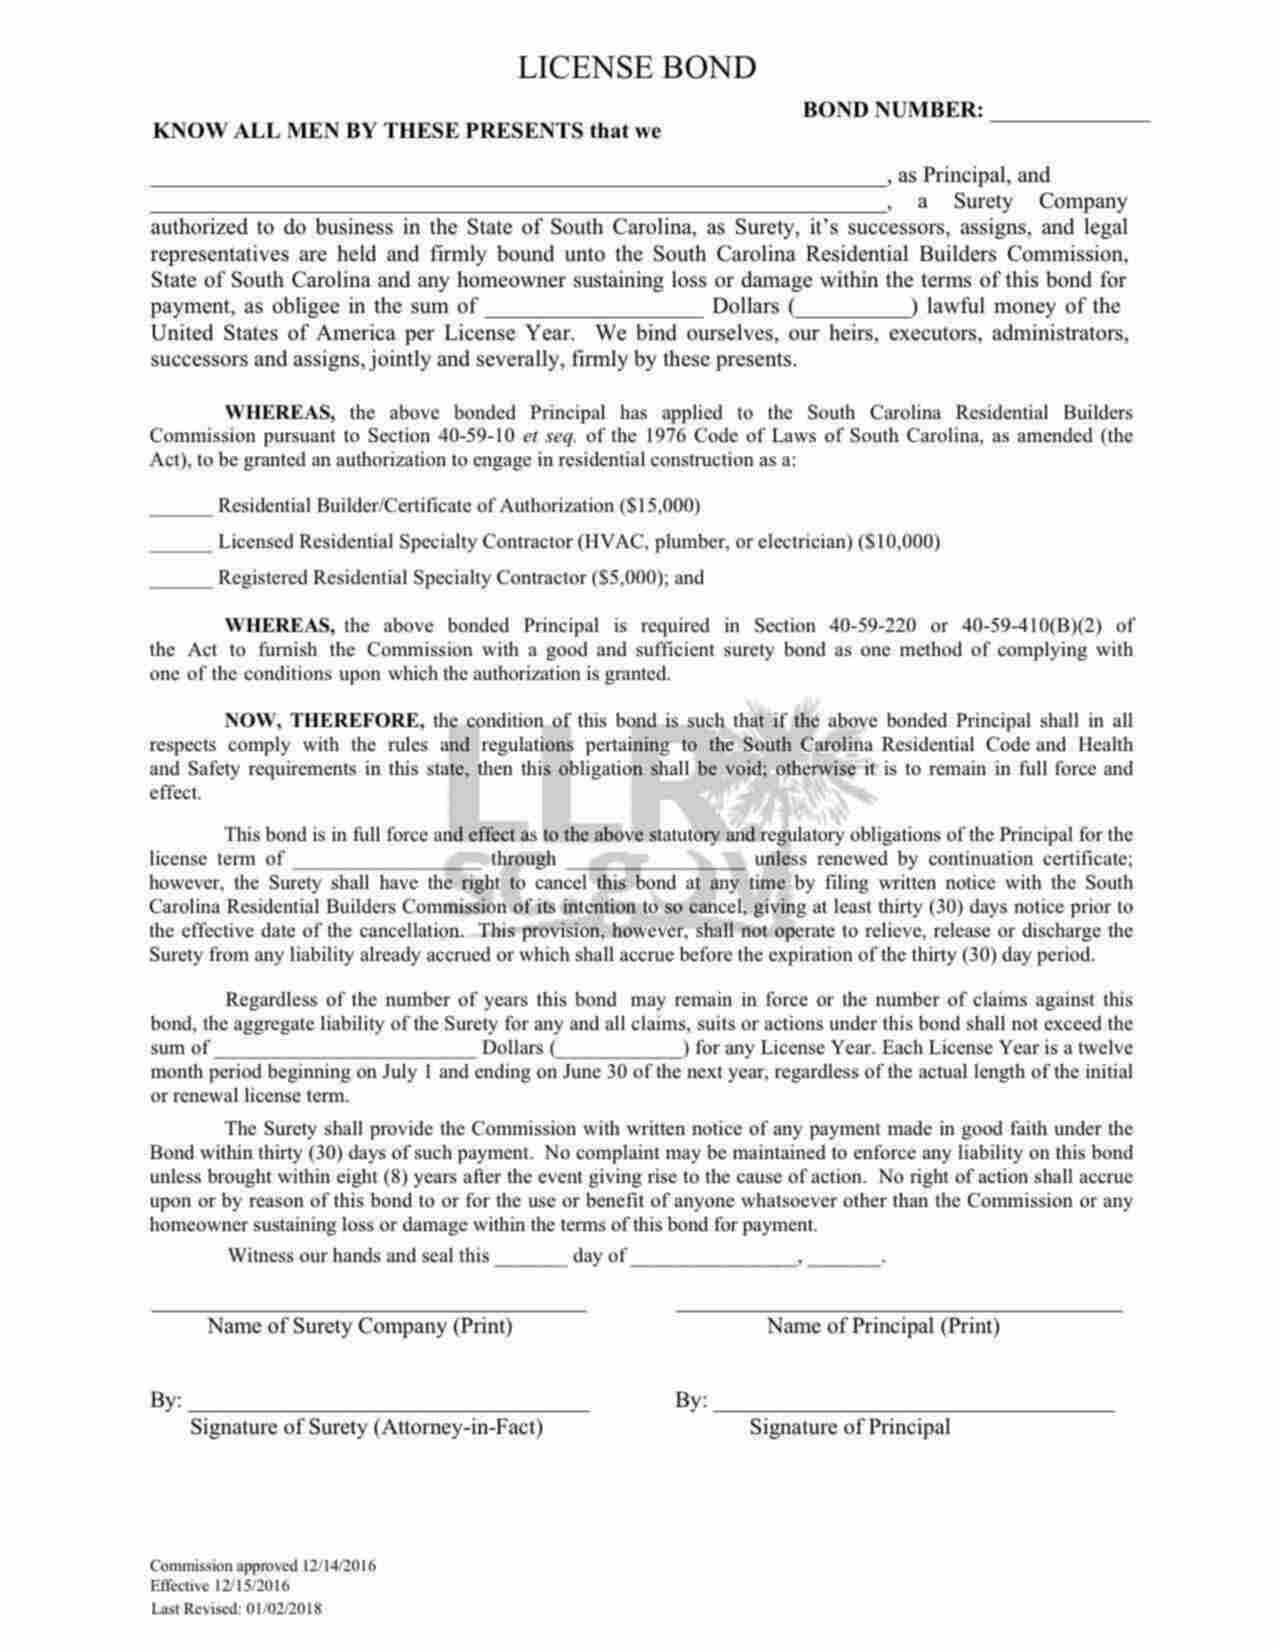 South Carolina Licensed Residential Specialty Contractor (HVAC, Plumber, or Electrician) Bond Form